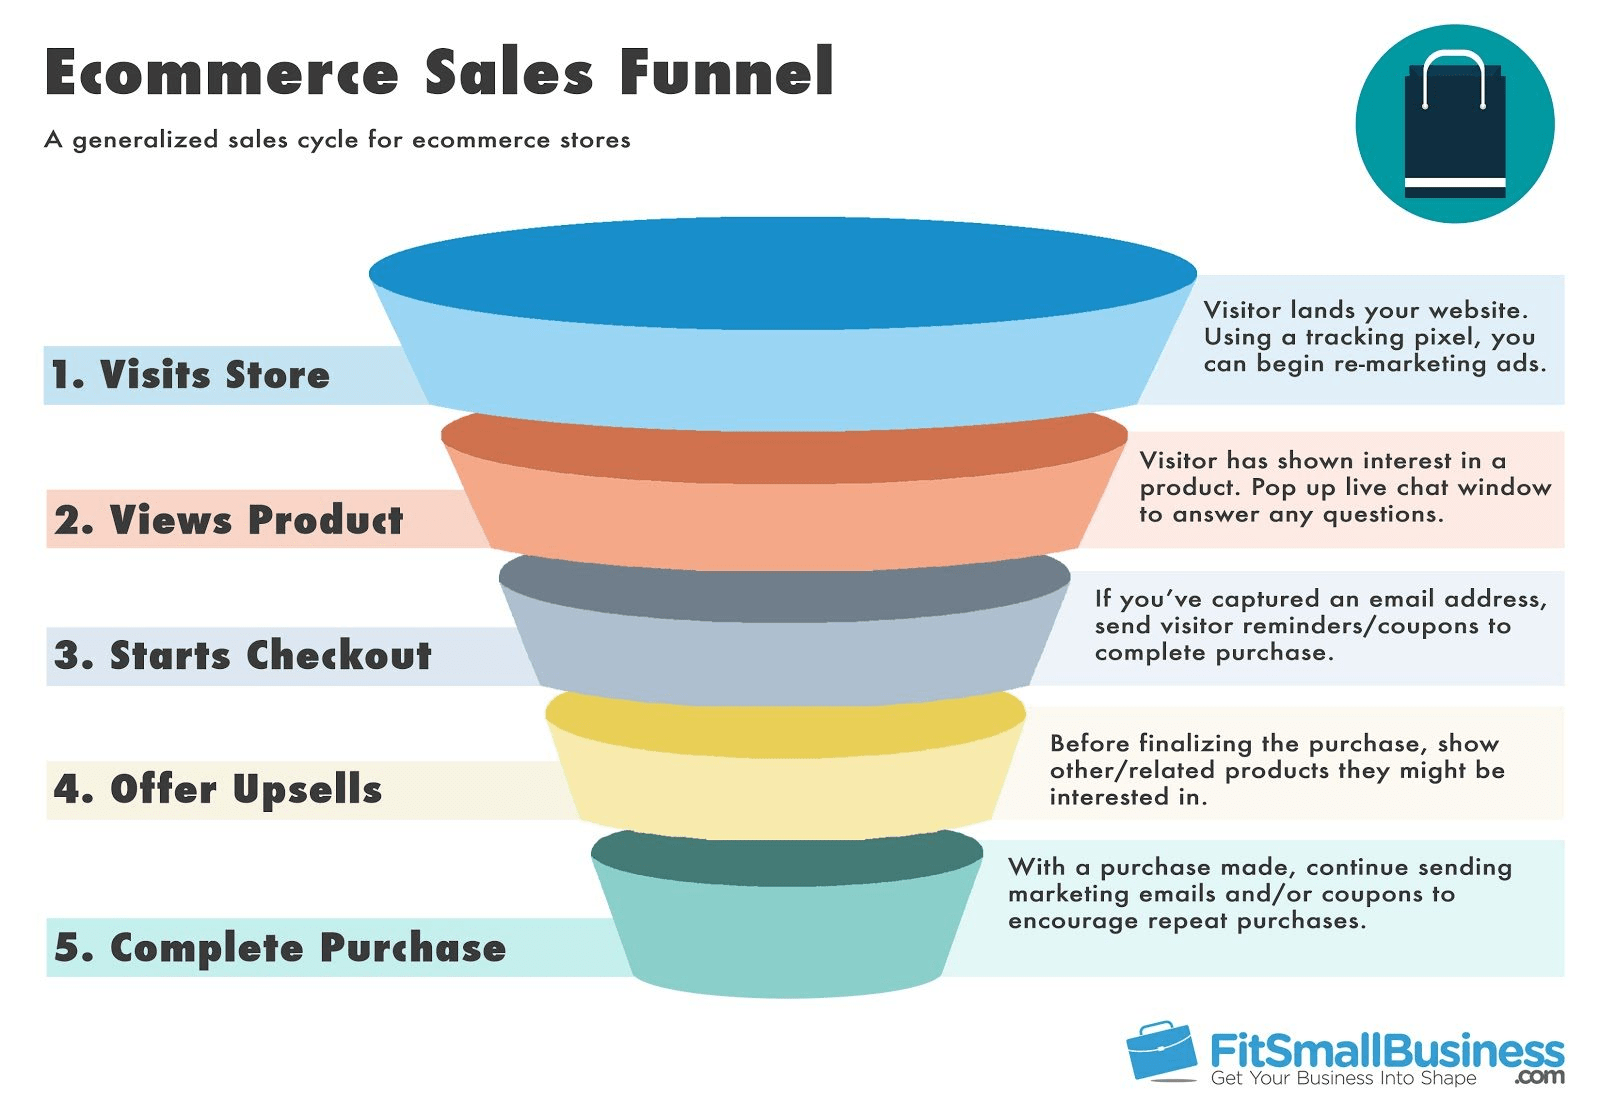 E-commerce sales funnel stages